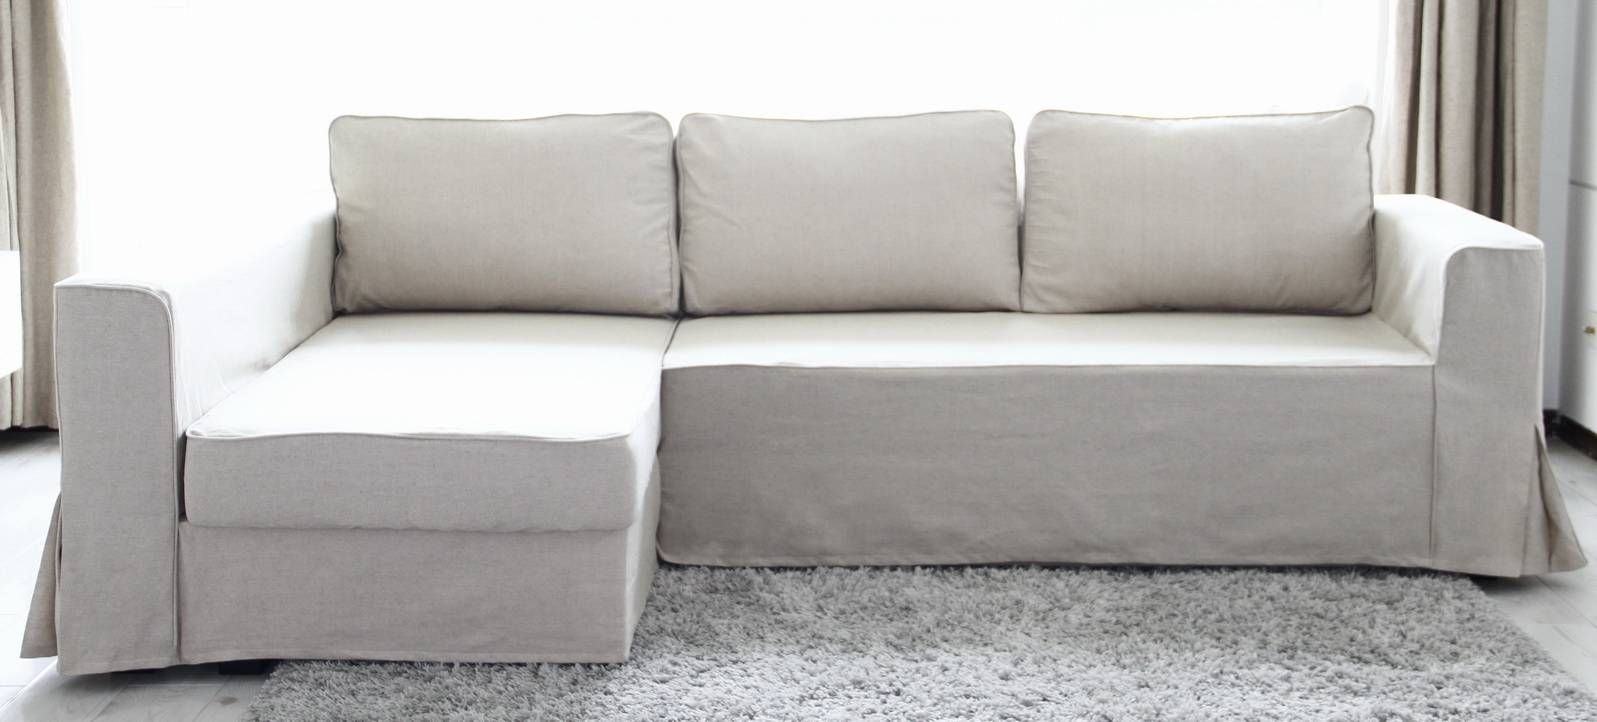 Loose Fit Linen Manstad Sofa Slipcovers Now Available Inside Slipcovers For Chaise Lounge Sofas (View 1 of 15)